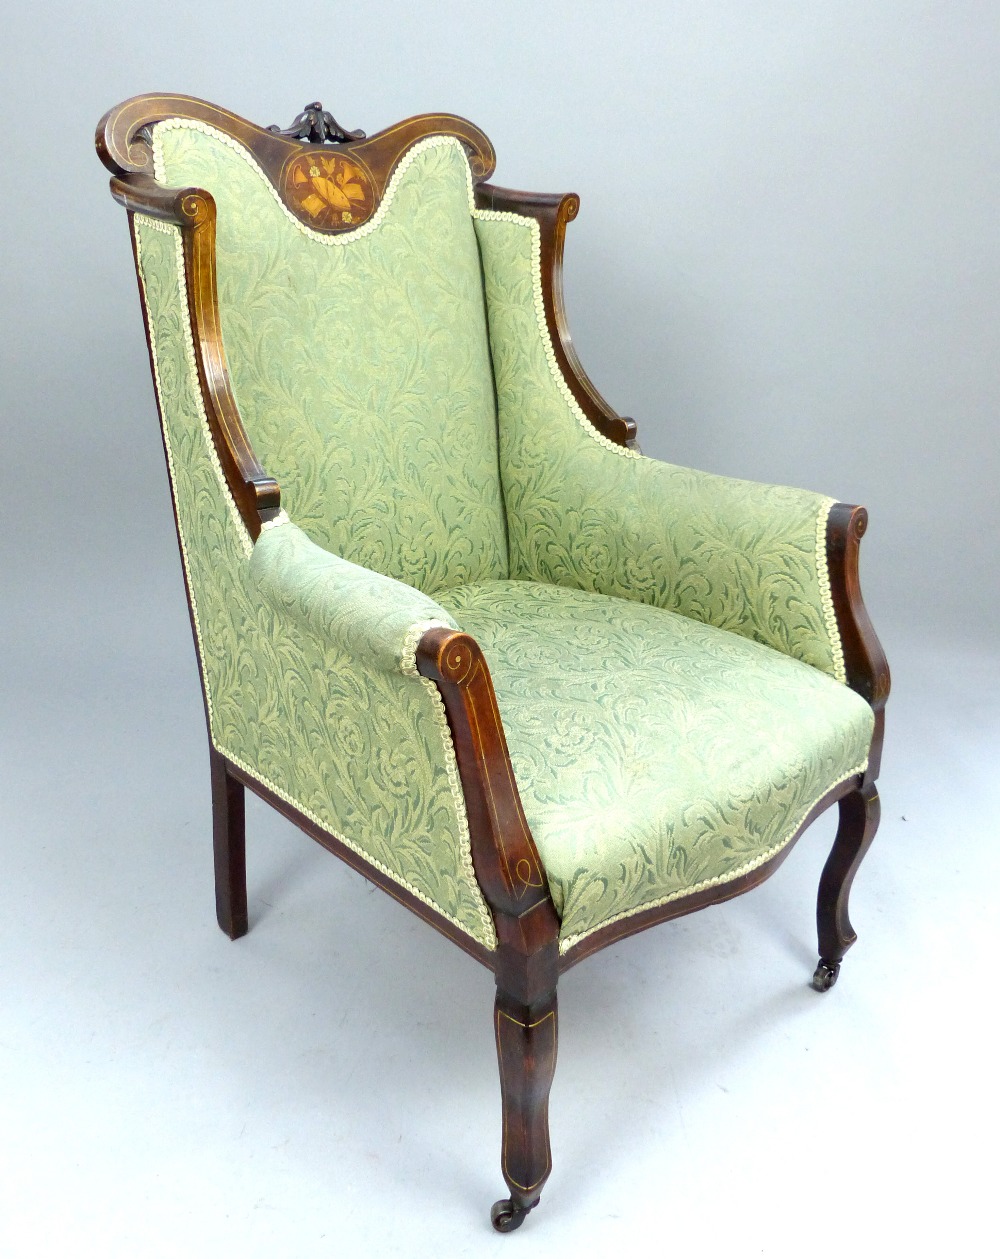 Edwardian wingback chair, mahogany with marquetry panel of musical instruments, floral carving, - Image 2 of 2